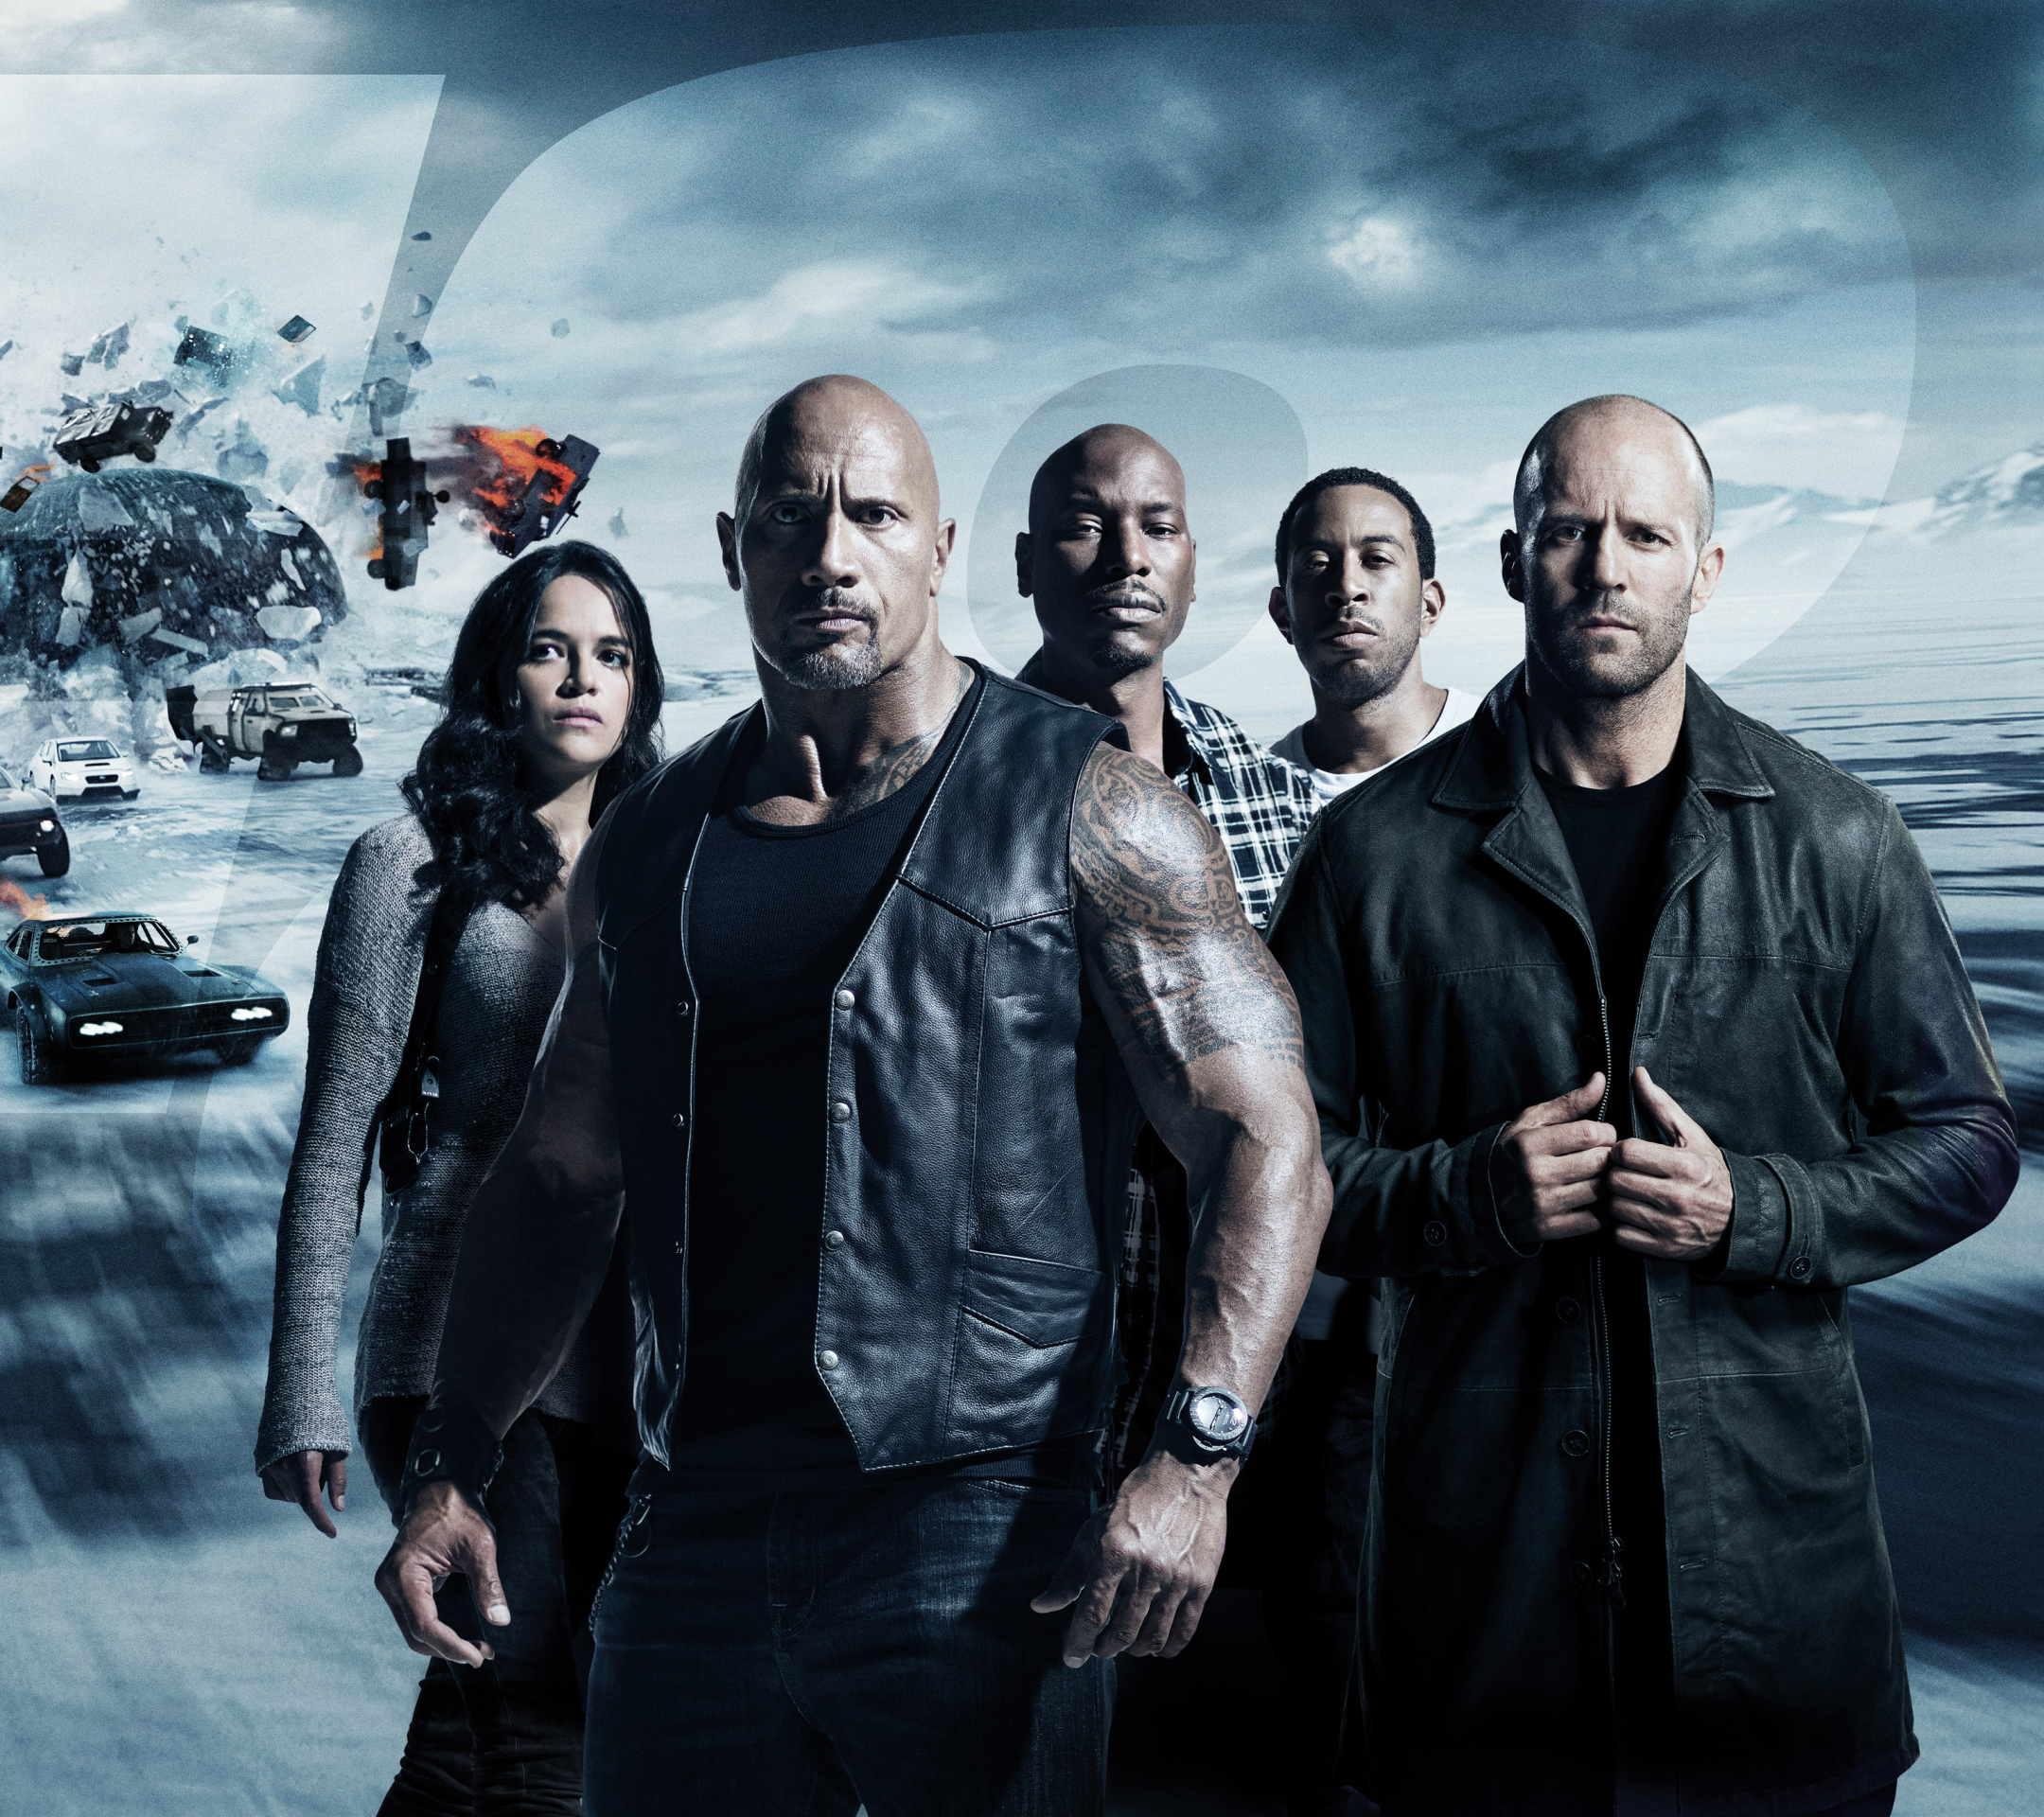 movie, the fate of the furious, dwayne johnson, jason statham, tyrese gibson, ludacris, vin diesel, charlize theron, michelle rodriguez, fast & furious